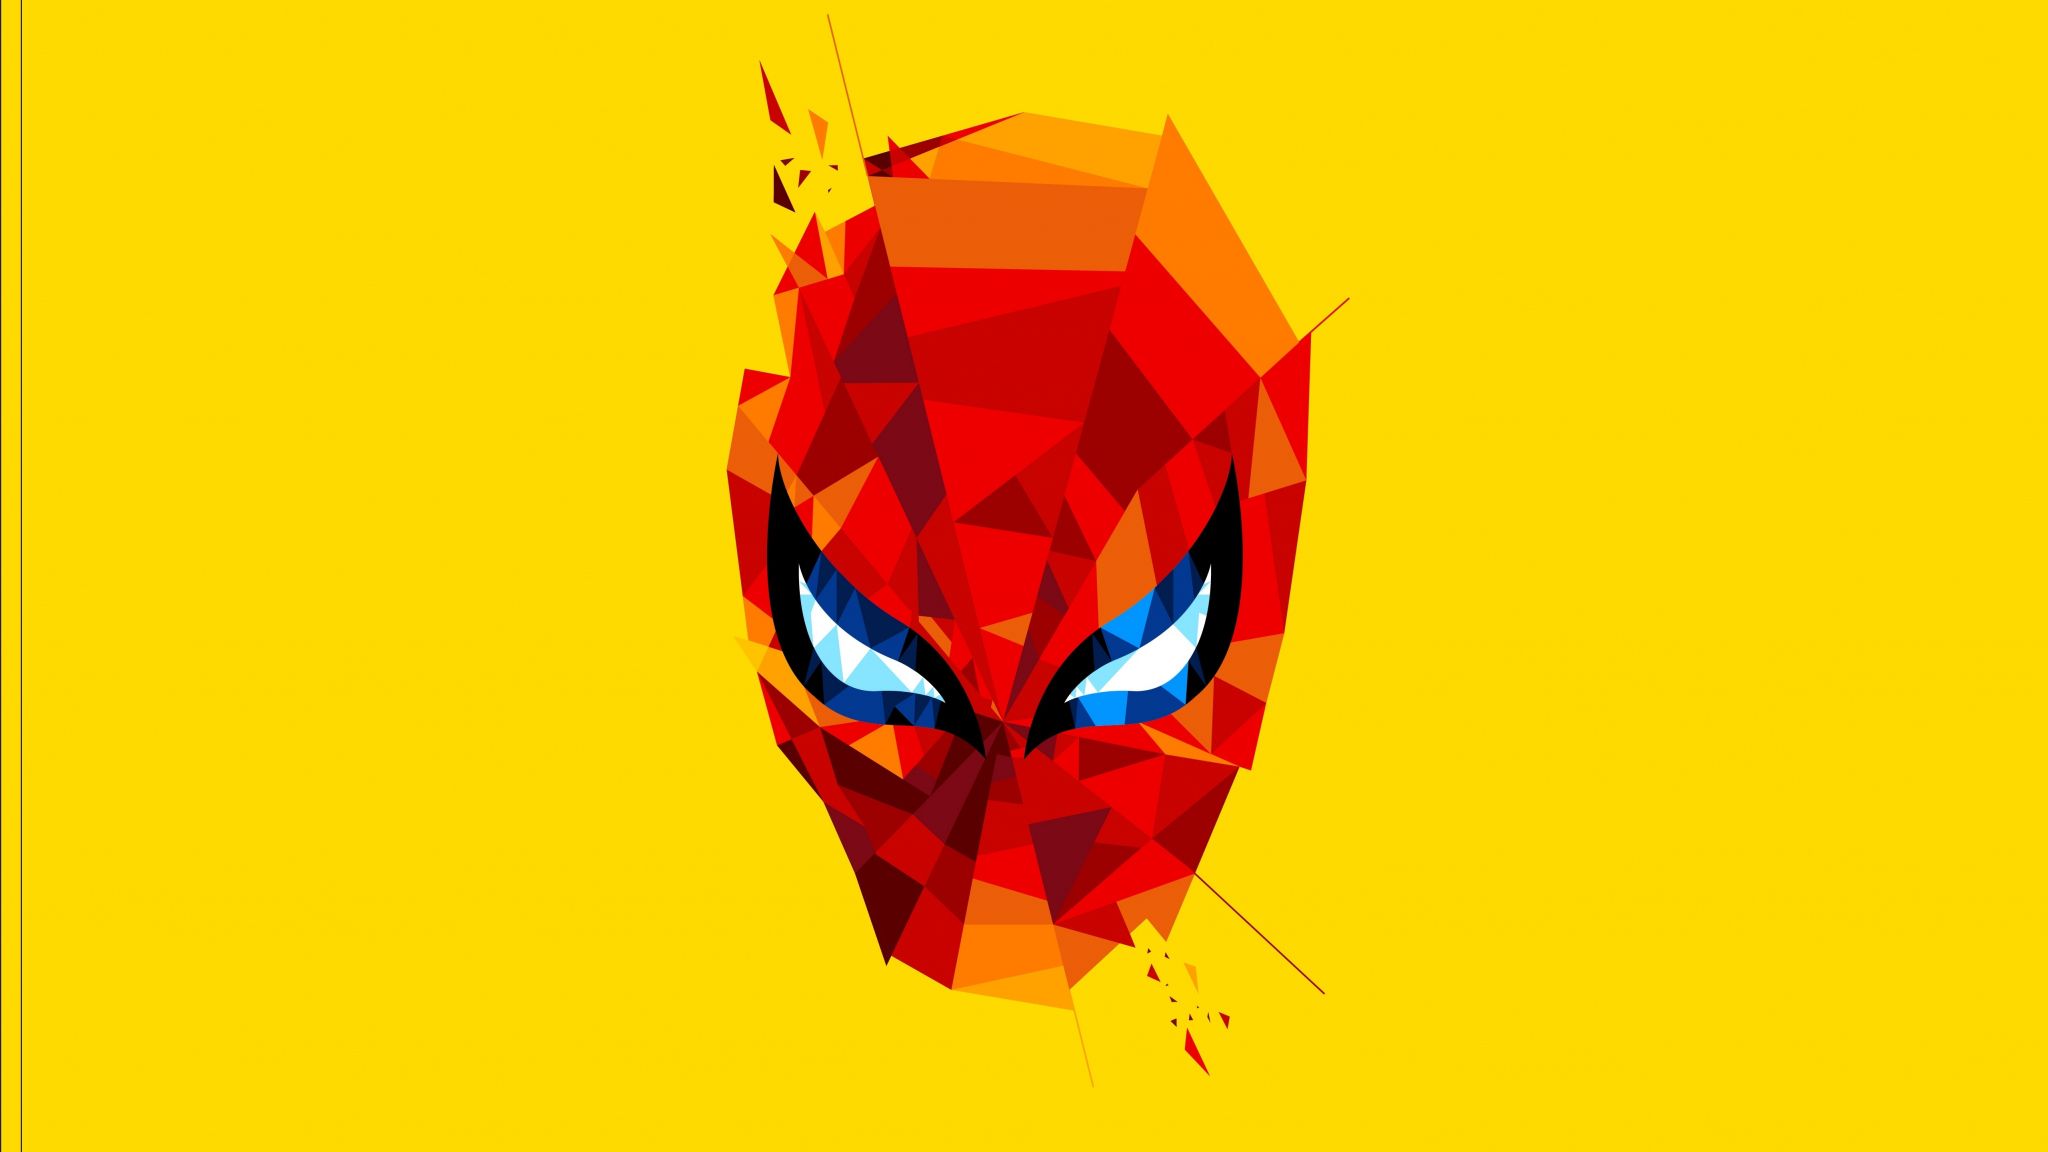 Download 2048x1152 Wallpaper Spidey, Spider Man, Mask, Artwork, Dual Wide, Widescreen, 2048x1152 HD Image, Background, 10426